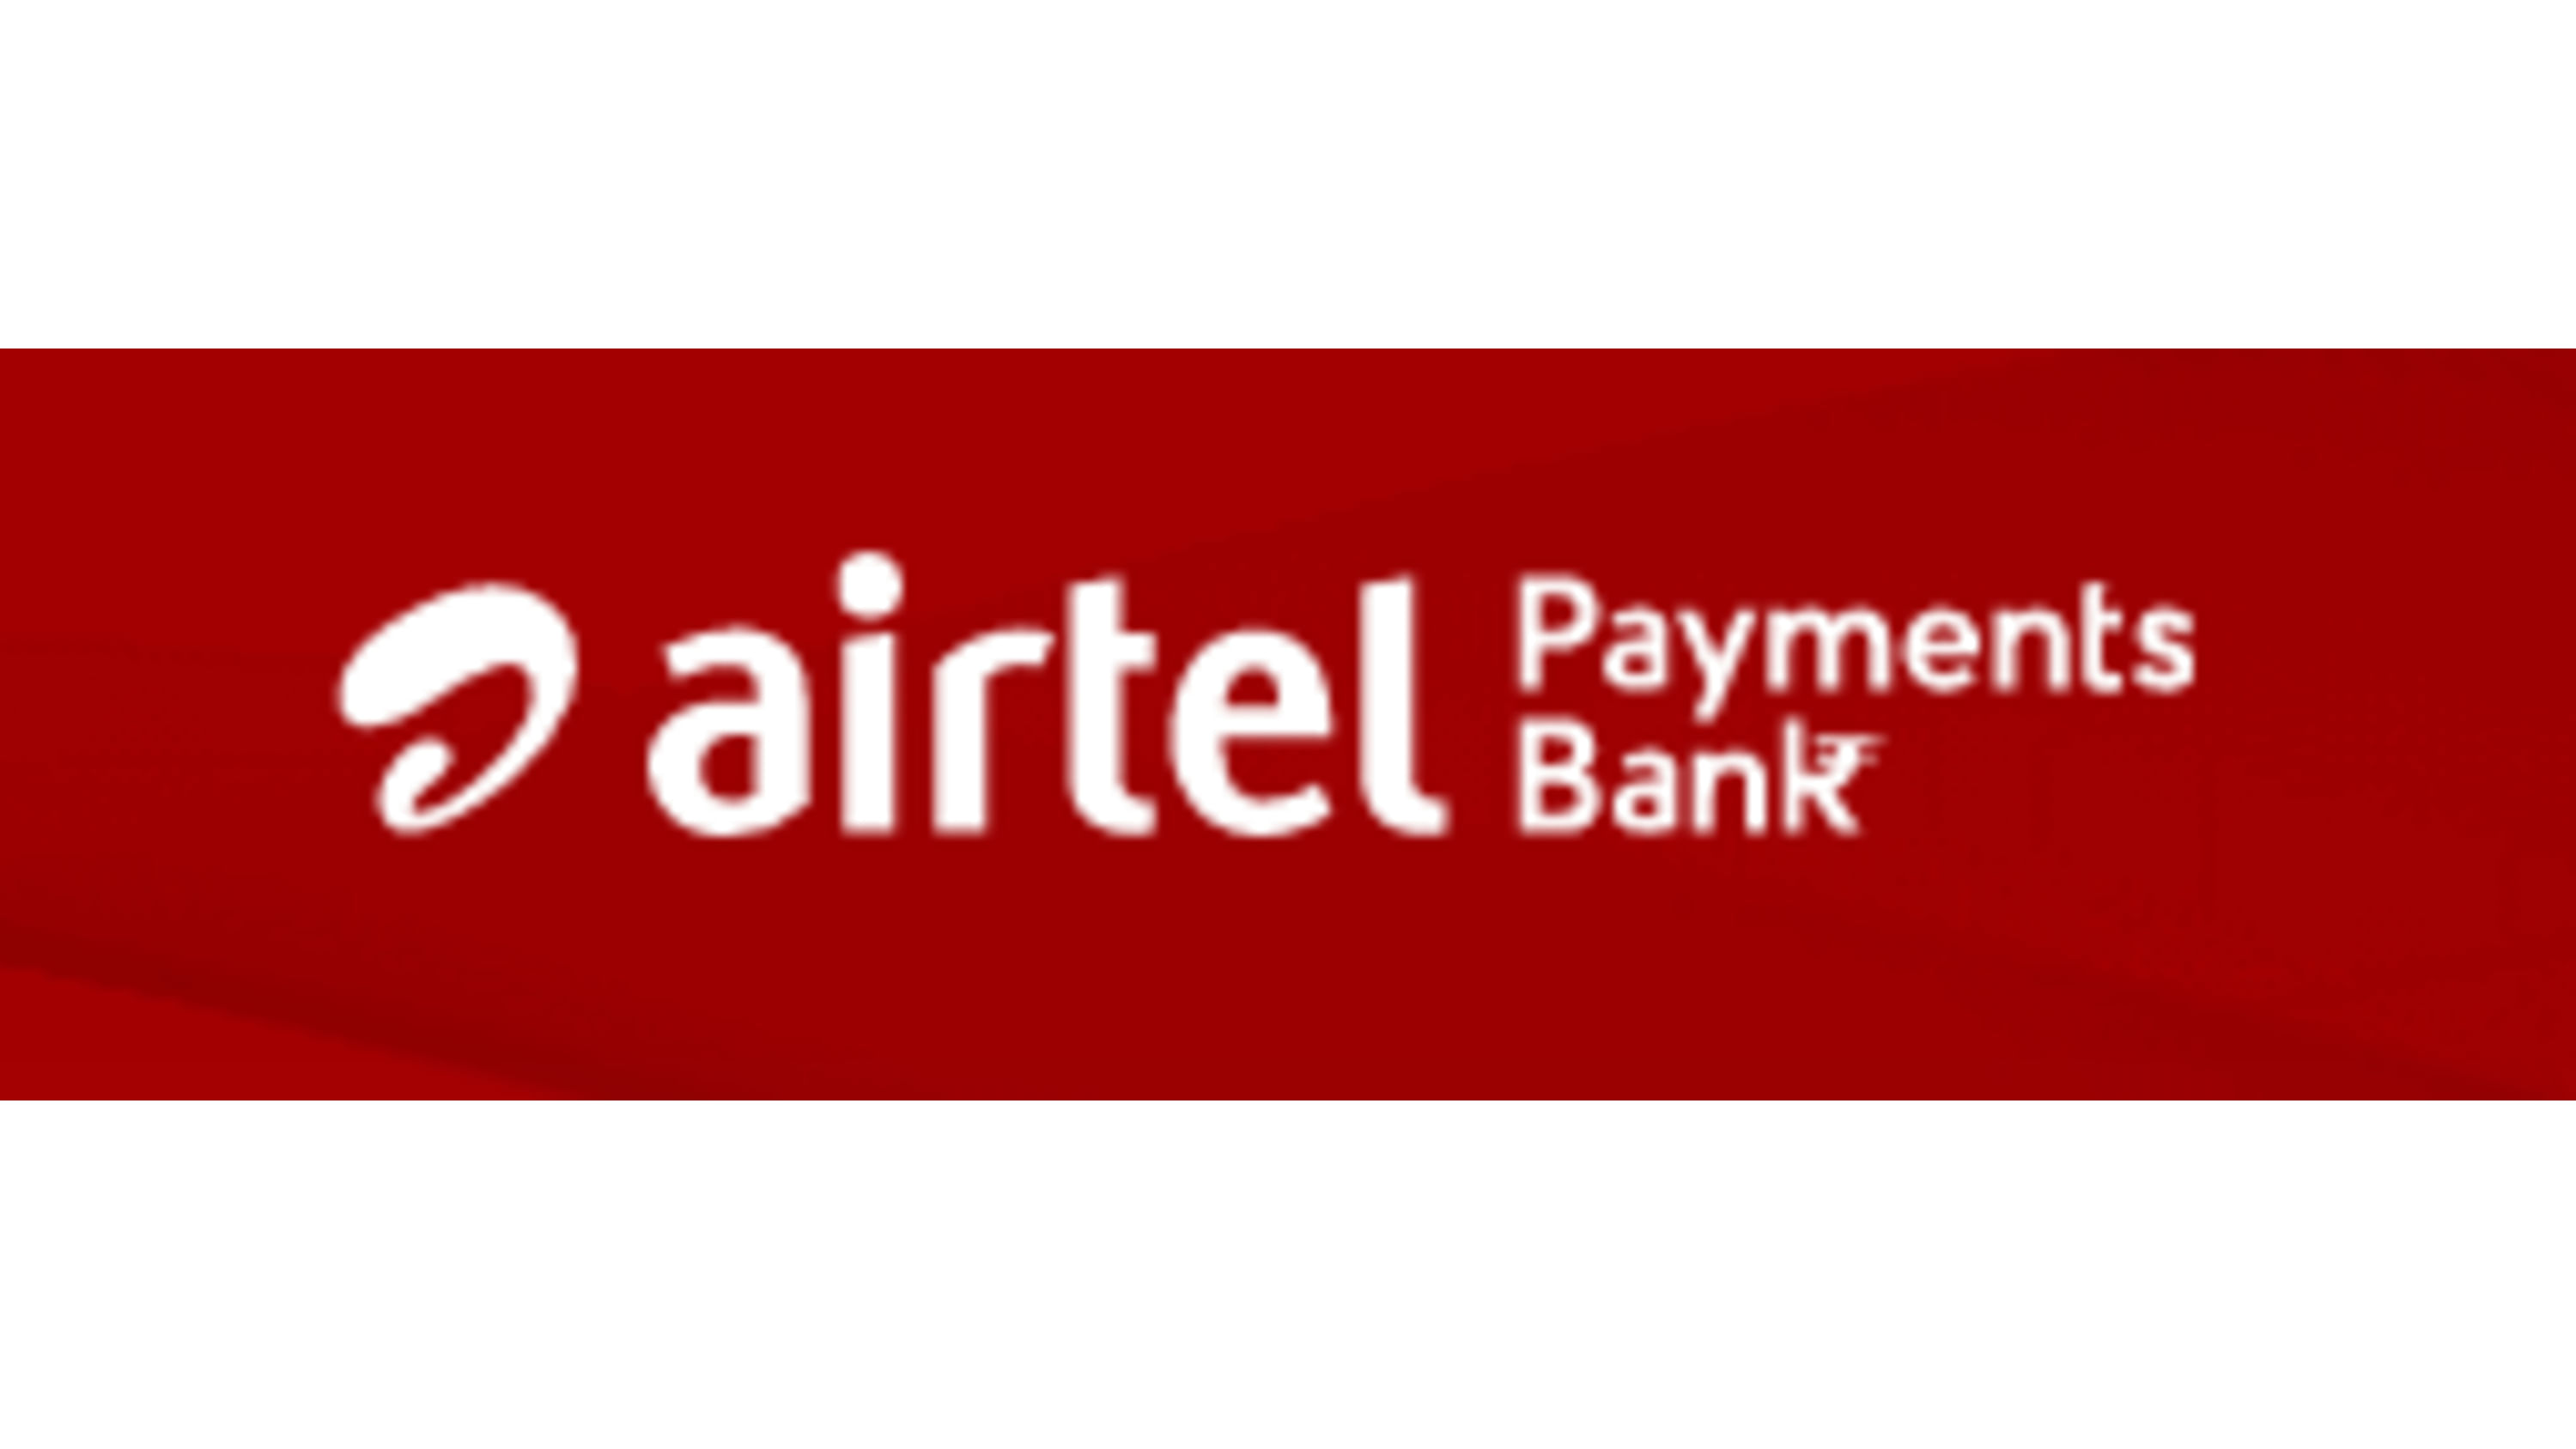 While Bharti Airtel has infused Rs 180.22 crore into Airtel Payments Bank, Bharti Enterprises has injected Rs 44.77 crore. (Screengrab: Airtel Payments Bank website)